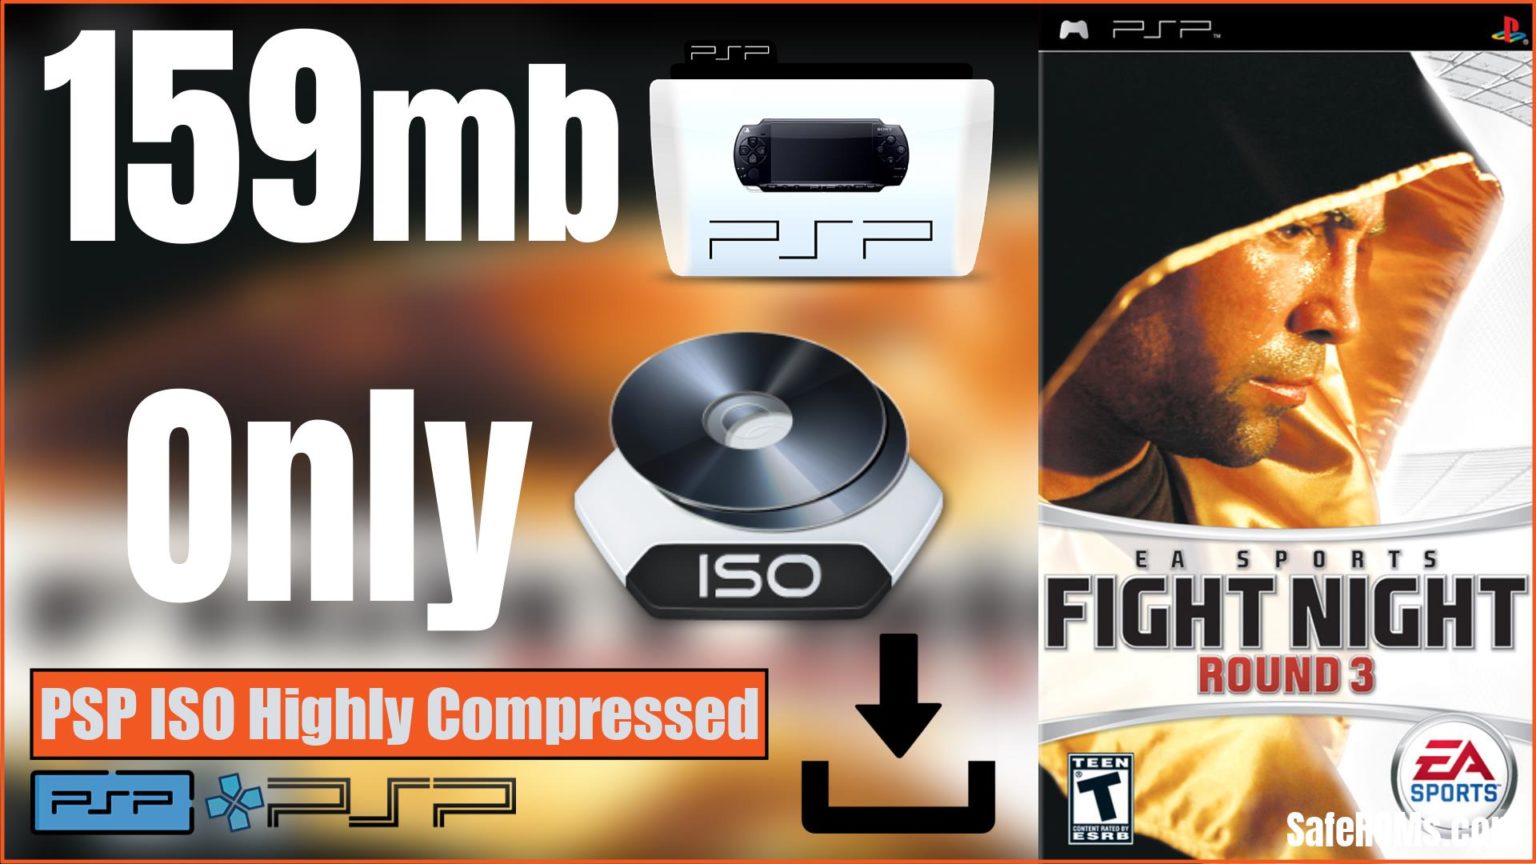 fight-night-round-3-psp-iso-highly-compressed-159mb-saferoms